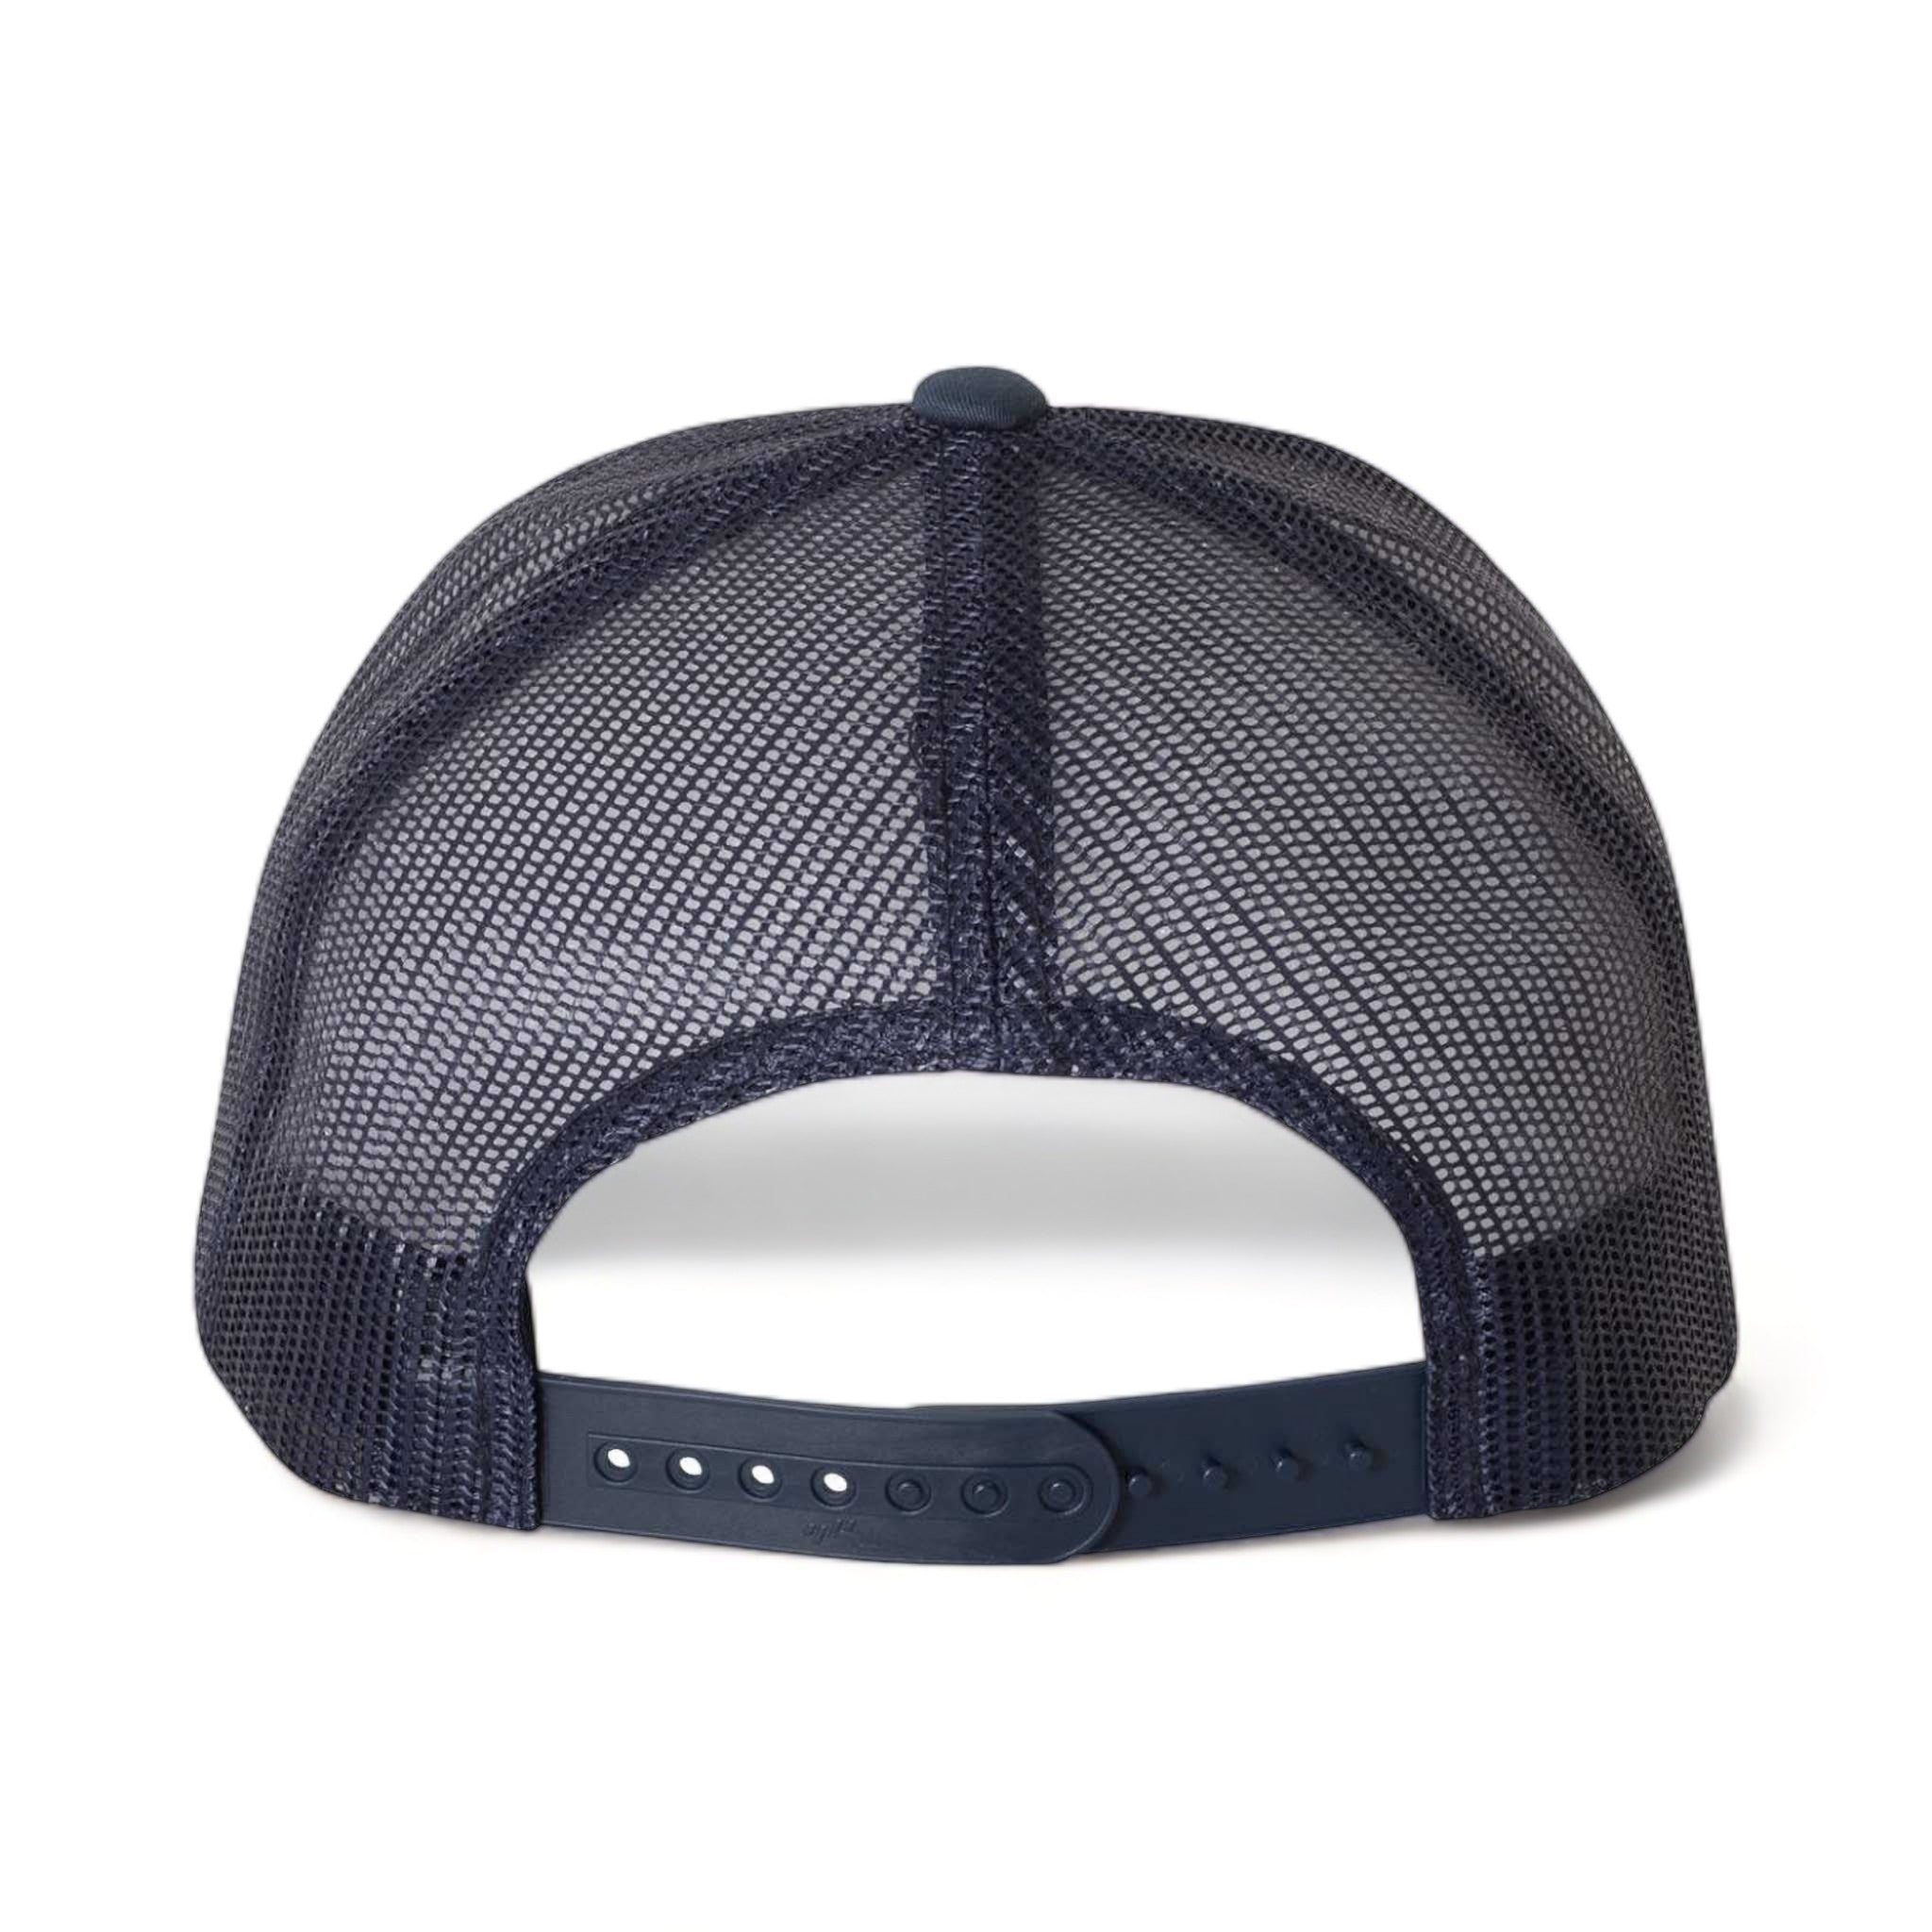 Back view of YP Classics 6606 custom hat in navy,  white and navy